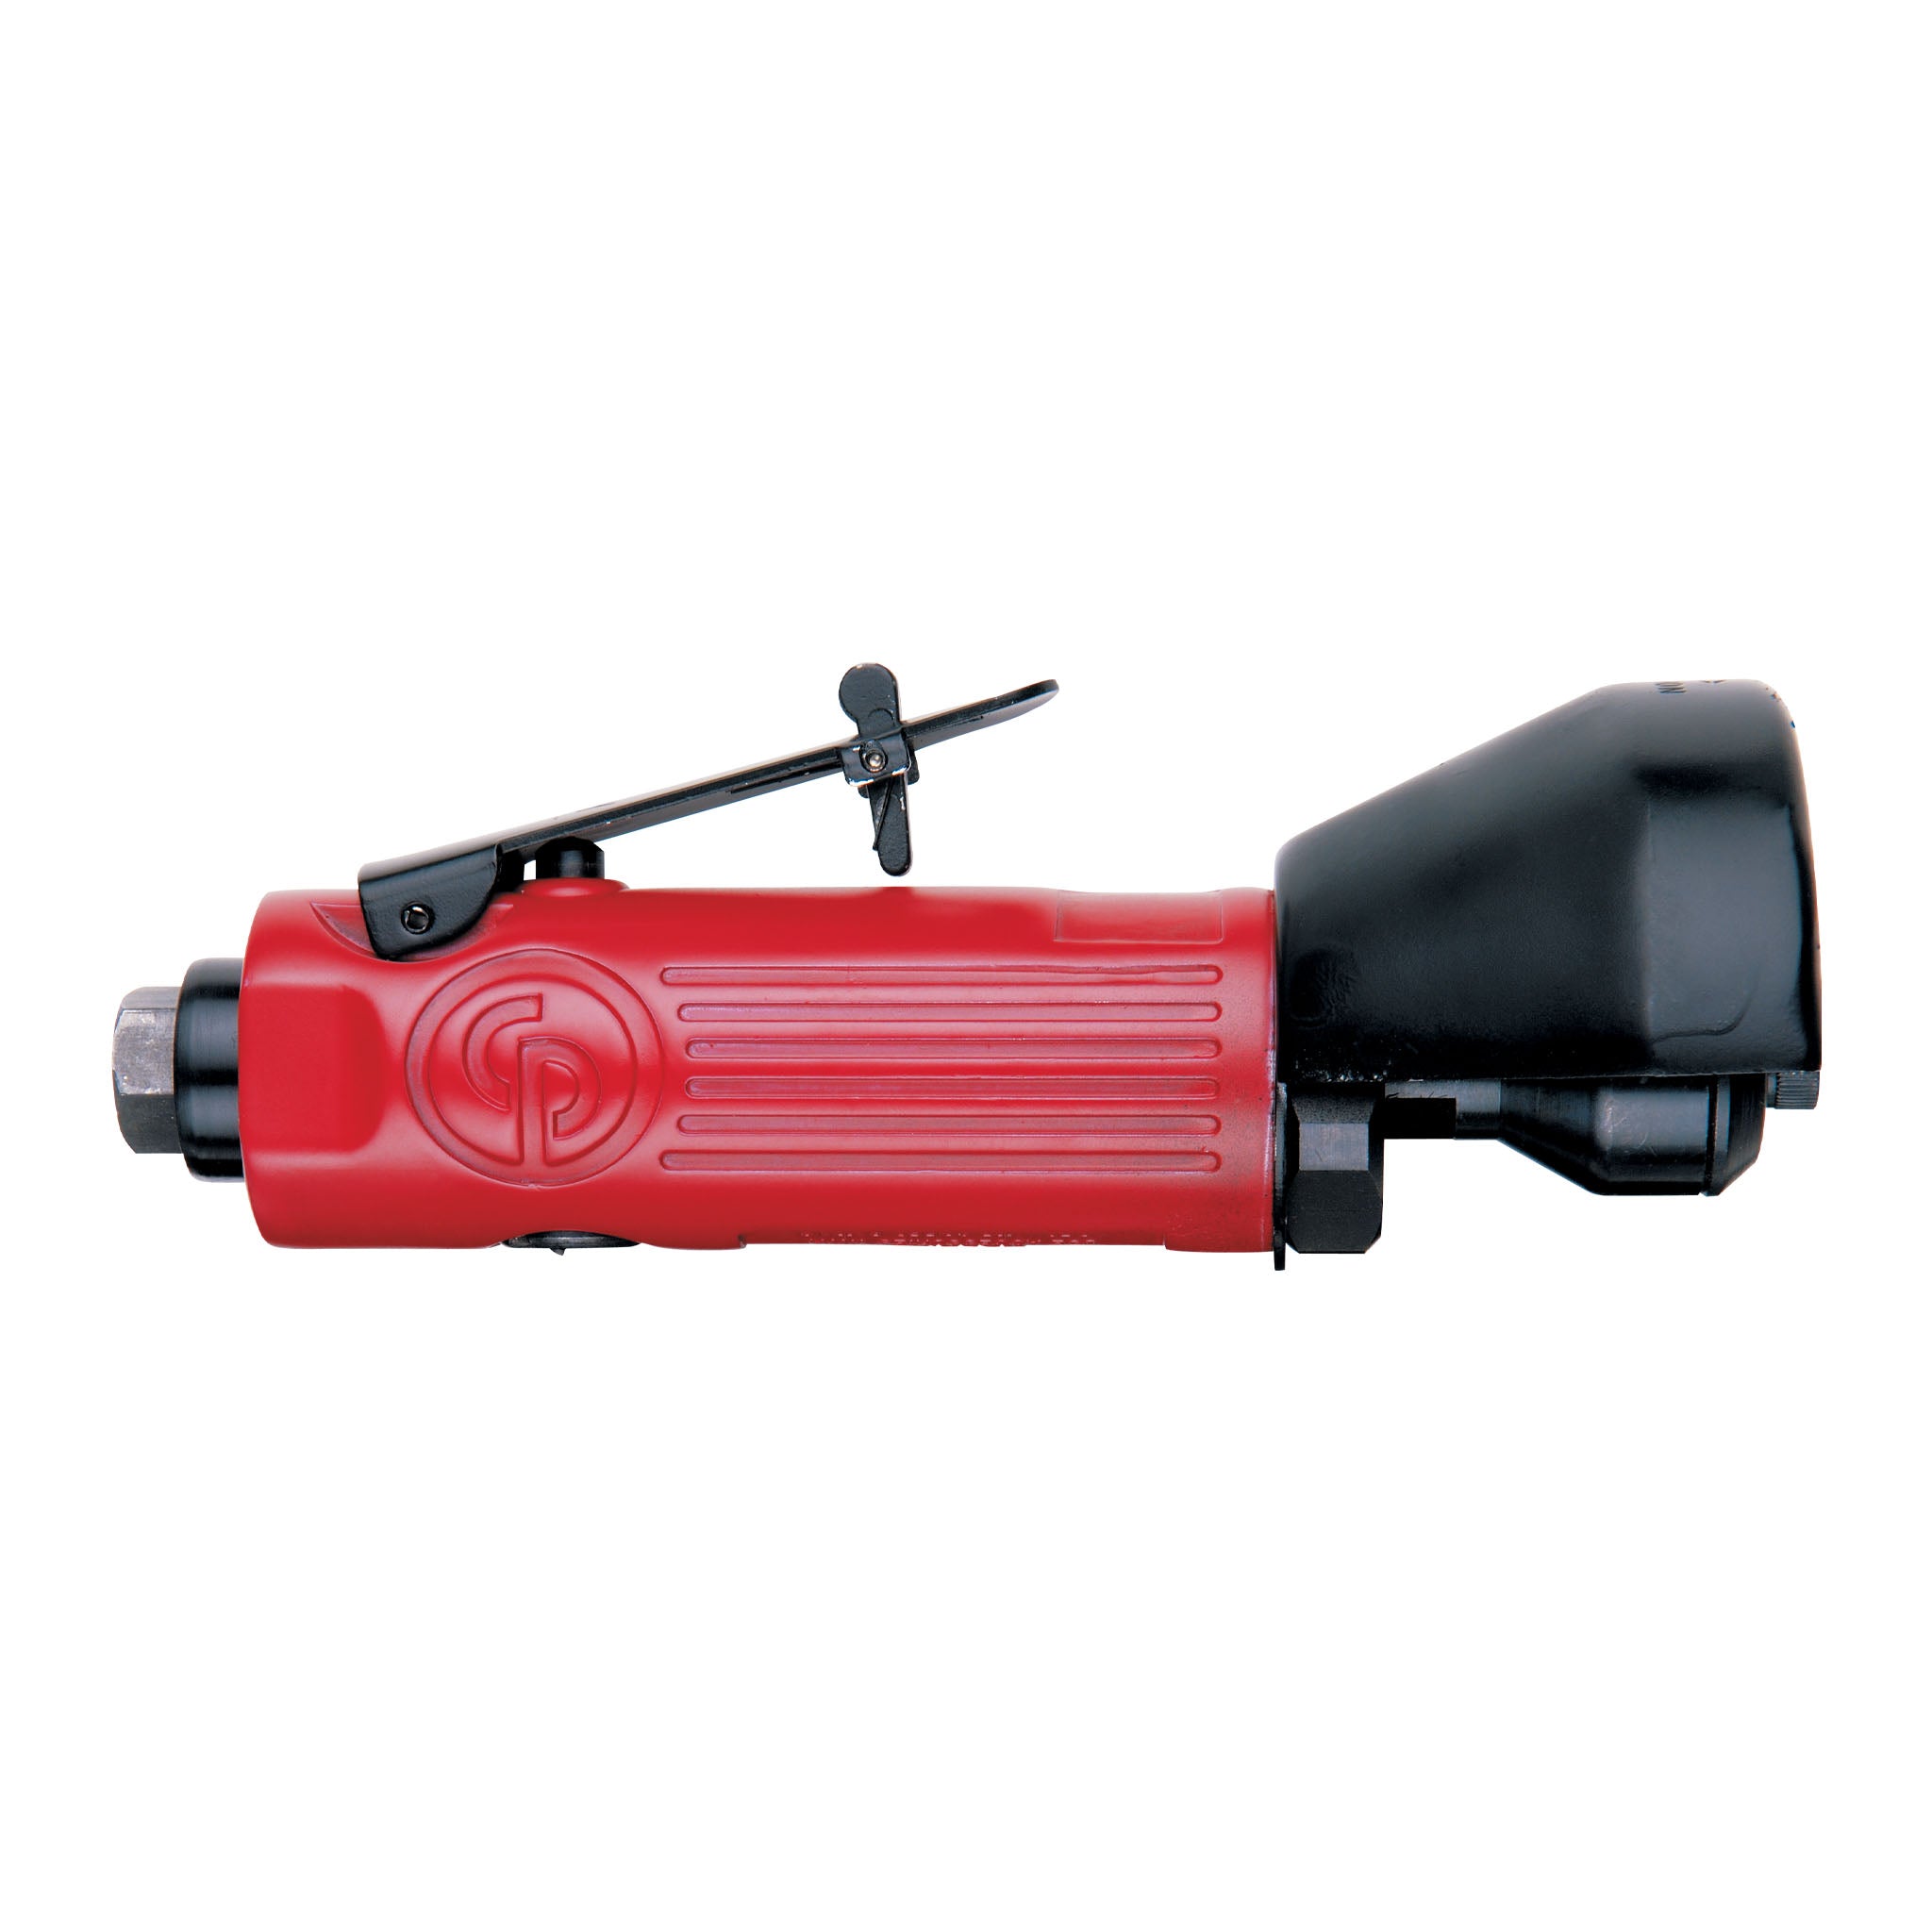 Chicago Pneumatic 1/4 Mini 90 Degree Angle Die Grinder - CP-875